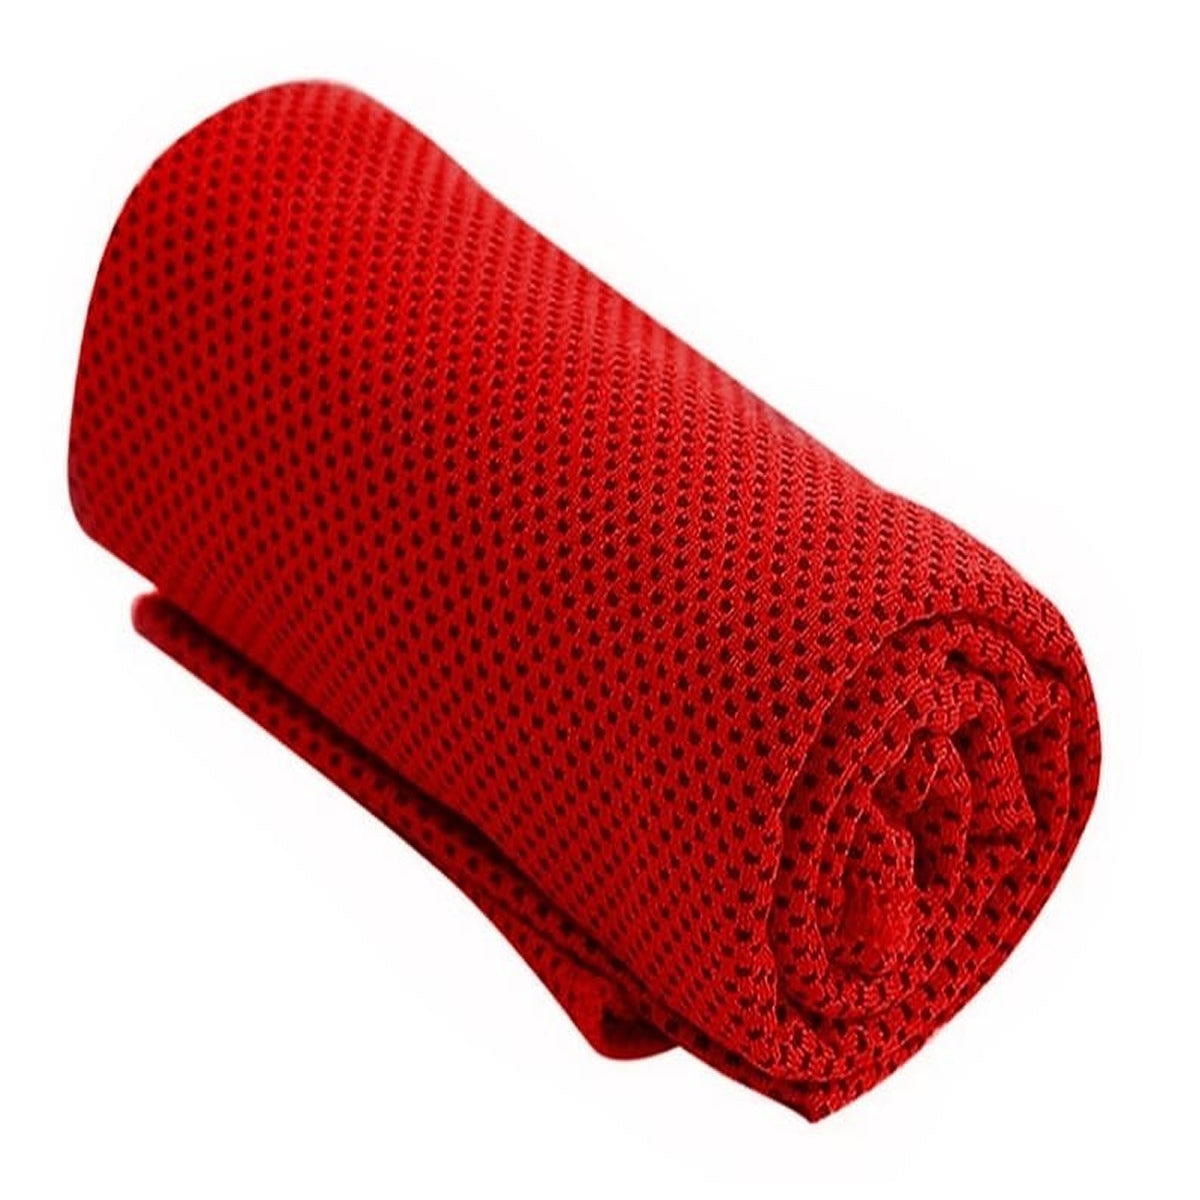 G-100 - Premium Large Sized Cooling Towel (40" x 12")